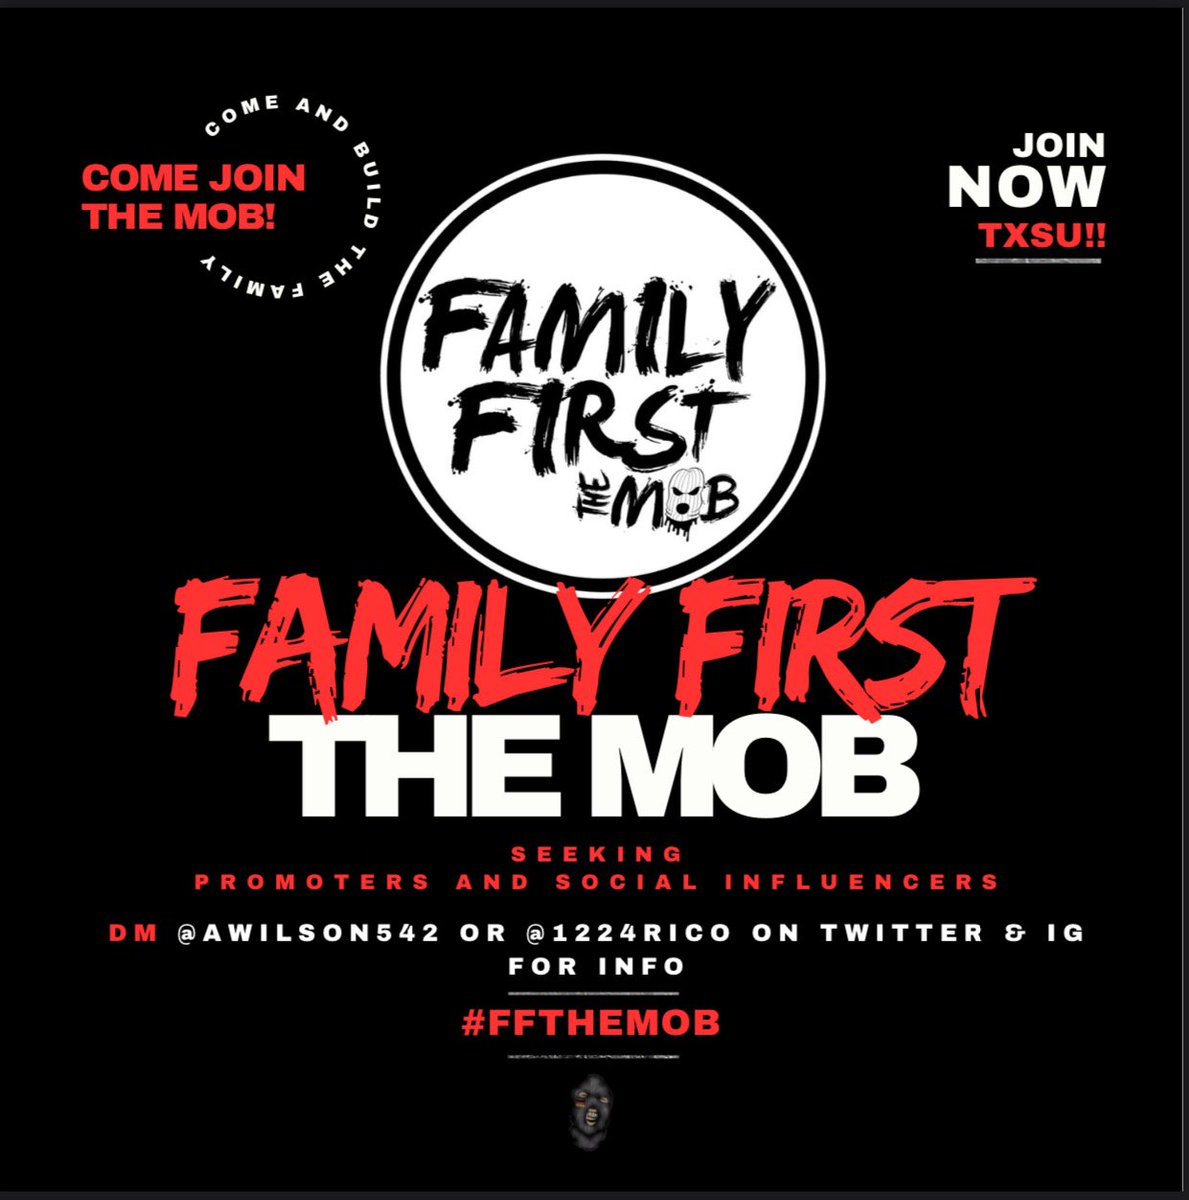 FAMILY FIRST THE MOB CONTINUES TO EXPAND........#TXSU If you are looking to be a part of the family please DM us so that you can be apart of the experiences that are about to take place #txsu24 #txsu25 #txsu26 #txsu27

@moblifedayday  @awilson542 @SayCrayton  @SameOhh_G